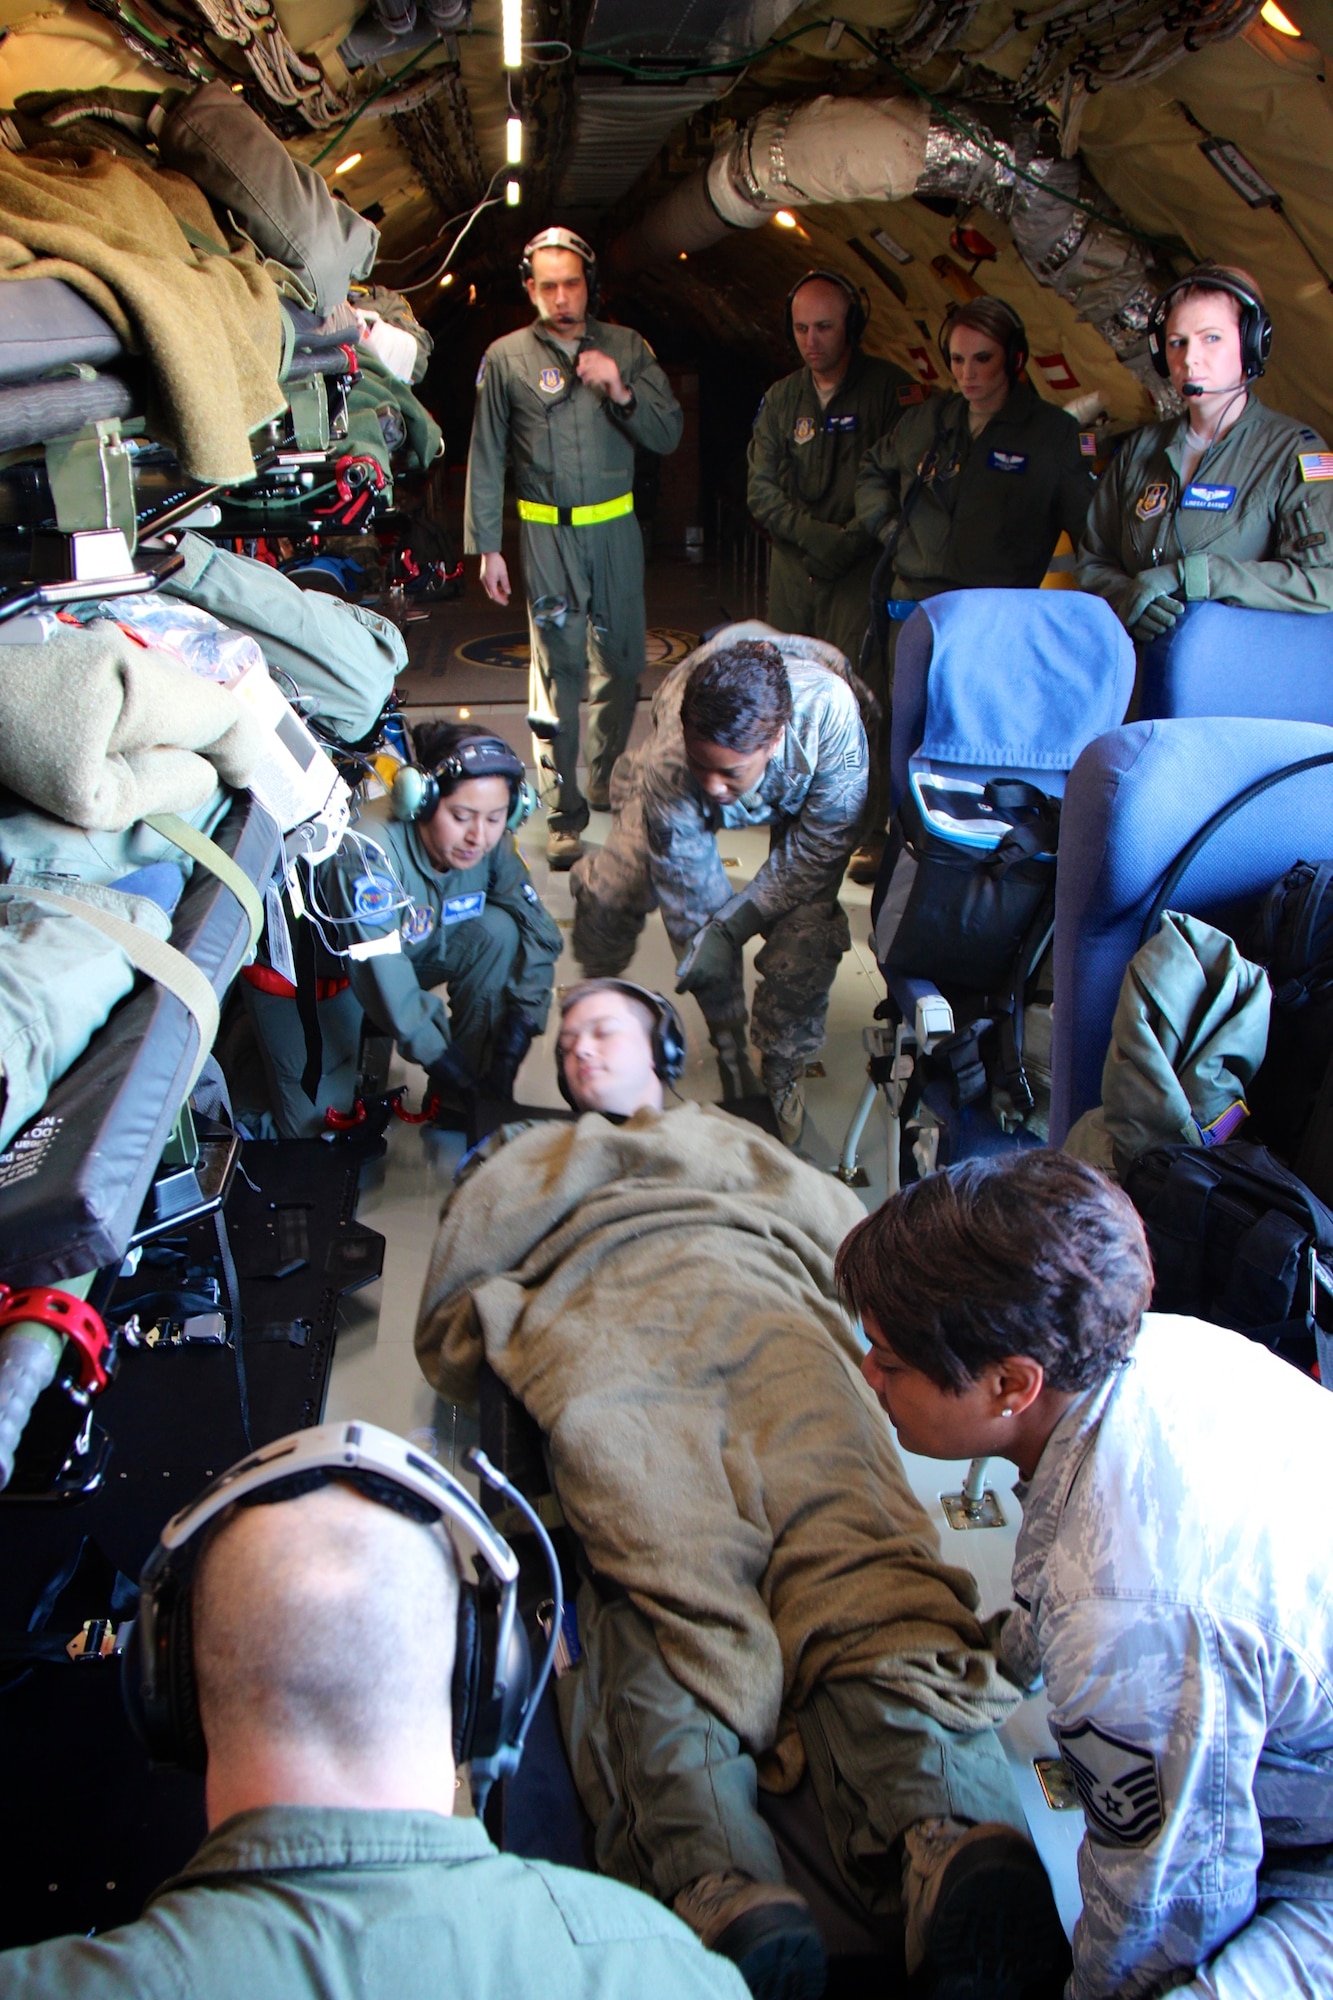 Before the sun rose, pockets of military training activity were taking place in Illinois.  Leading people with an early 0545 report time, 932nd Aeromedical Evacuation Squadron medical members, both trainees and instructors, prepare to lift a patient into a secure position before travel aboard a KC-135 aircraft.  They also explained in detail how to use the oxygen mask in case of smoke or fire to their "simulated patients" as they waited to take off on a special refueling plane, visiting from the 434th Air Refueling Wing, Grissom Air Reserve Base, Ind.   Both the 932nd Airlift Wing and 434th Air Refueling Wing, flew together to get medical training time in the air, and both are units under Air Force Reserve Command. Known as the "Gateway Wing", the 932nd Airlift Wing near Belleville, is located less than 30 minutes from the Saint Louis Arch and reservists live nationwide on both sides of the Mississippi River.  The plane took off early on January 21, 2017, Scott Air Force Base, Ill.  (U.S. Air Force photo by Lt. Col. Stan Paregien)